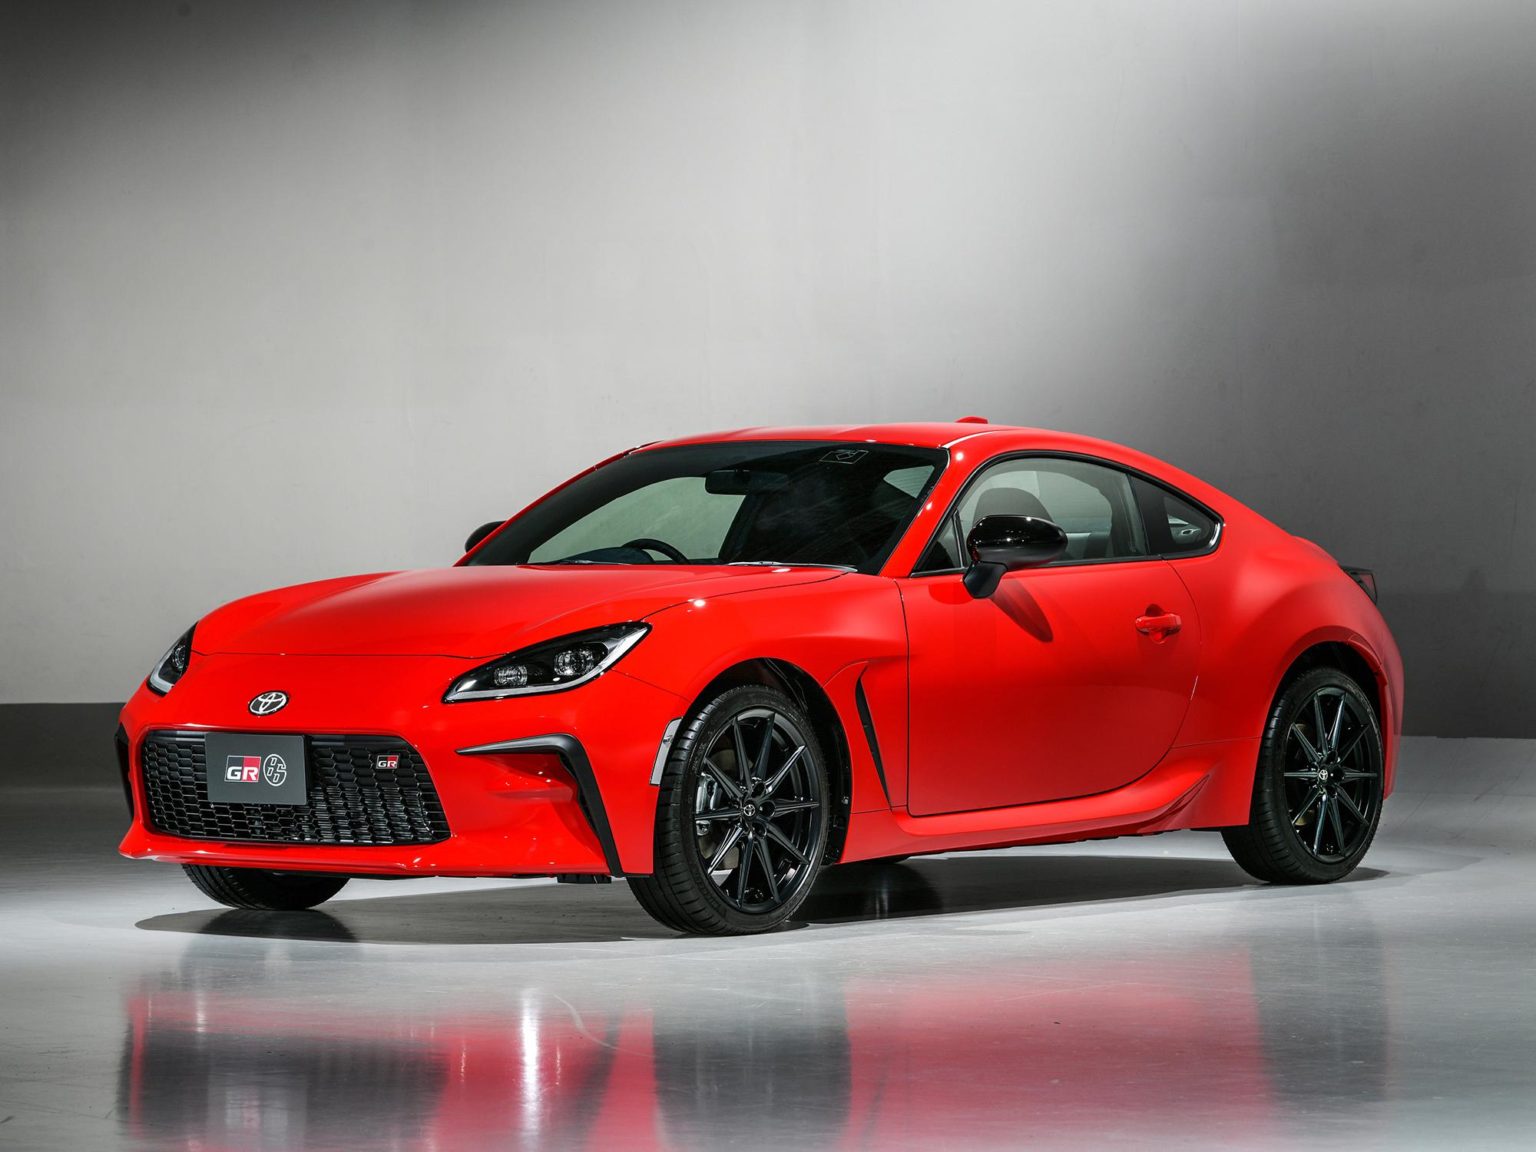 The 2022 Toyota GR 86 is a revised version of the company's punchy sports car.